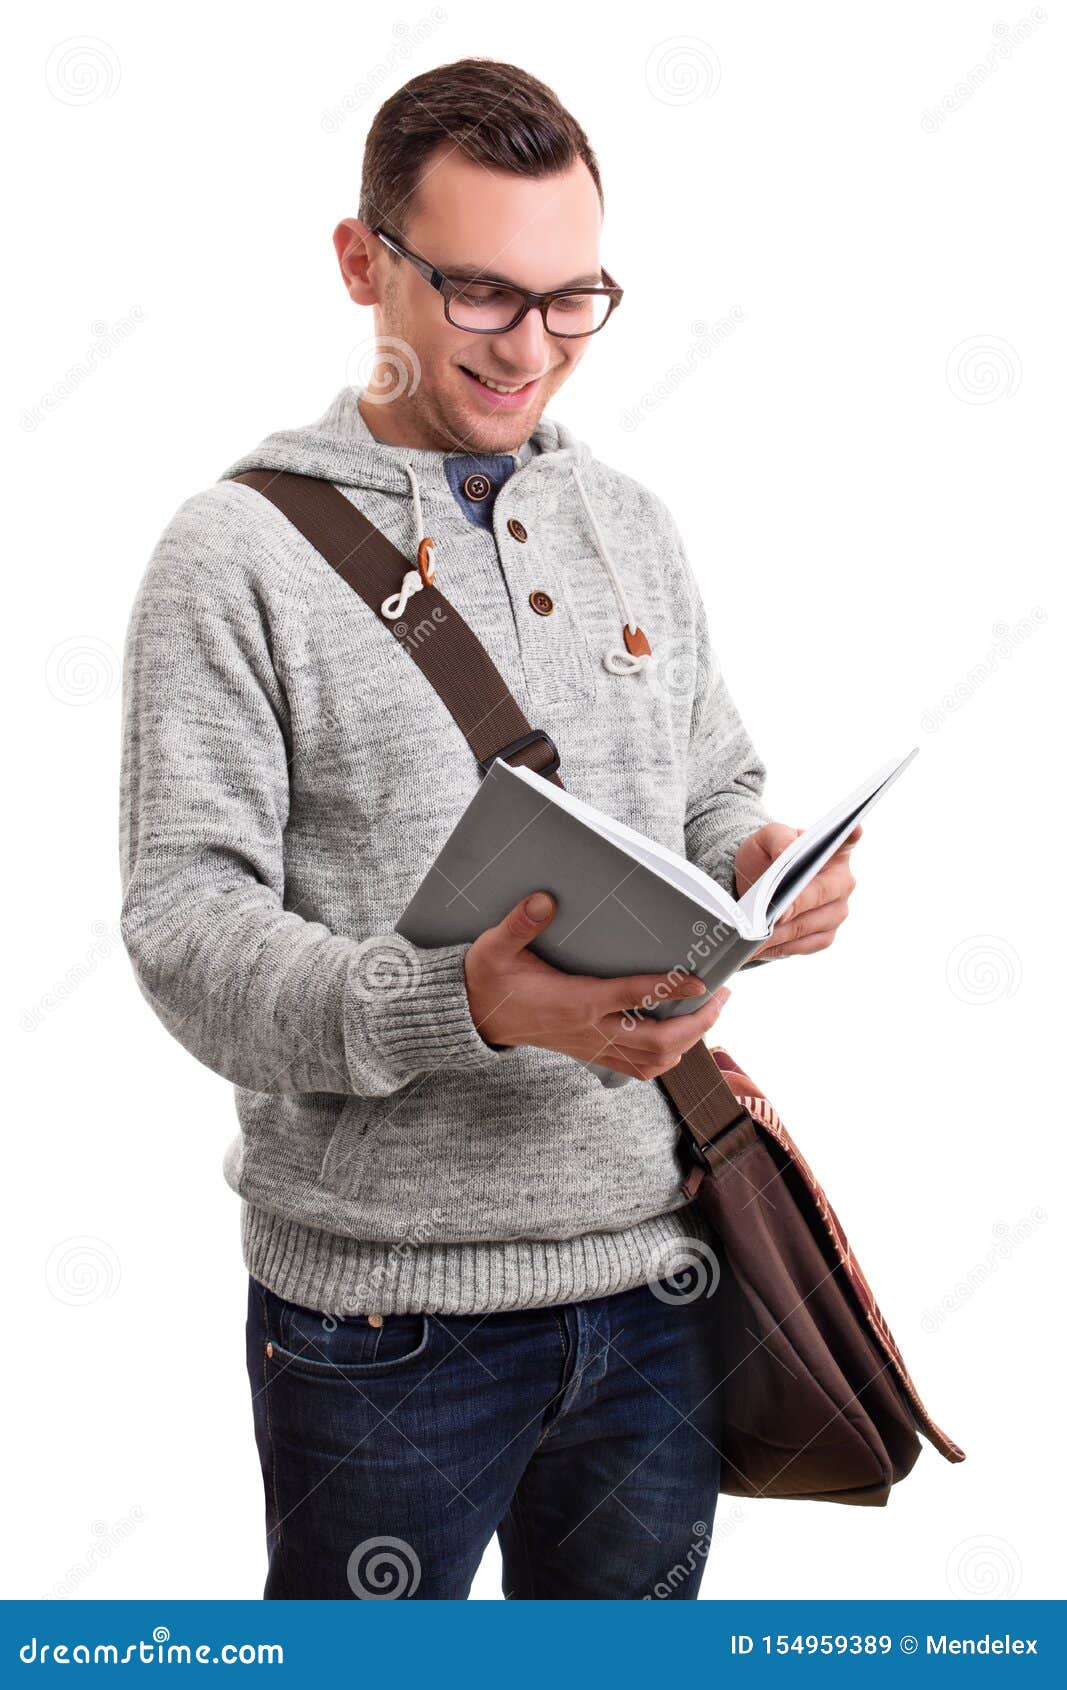 Smiling Male Student with a Book Stock Image - Image of hands ...